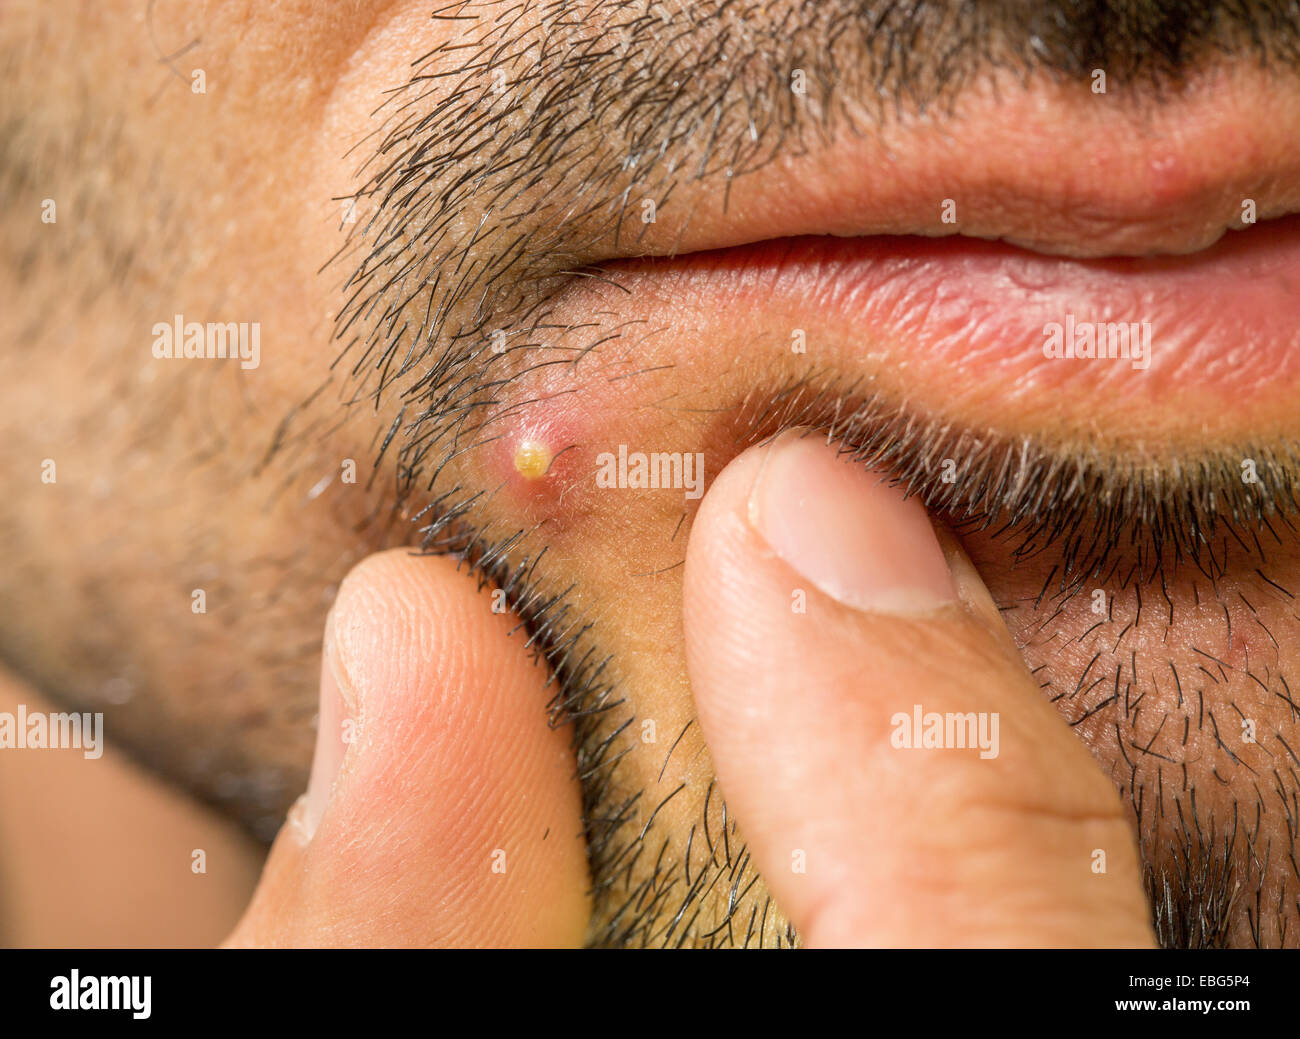 Caucasian man with stub and big pimple with 2 fingers Stock Photo